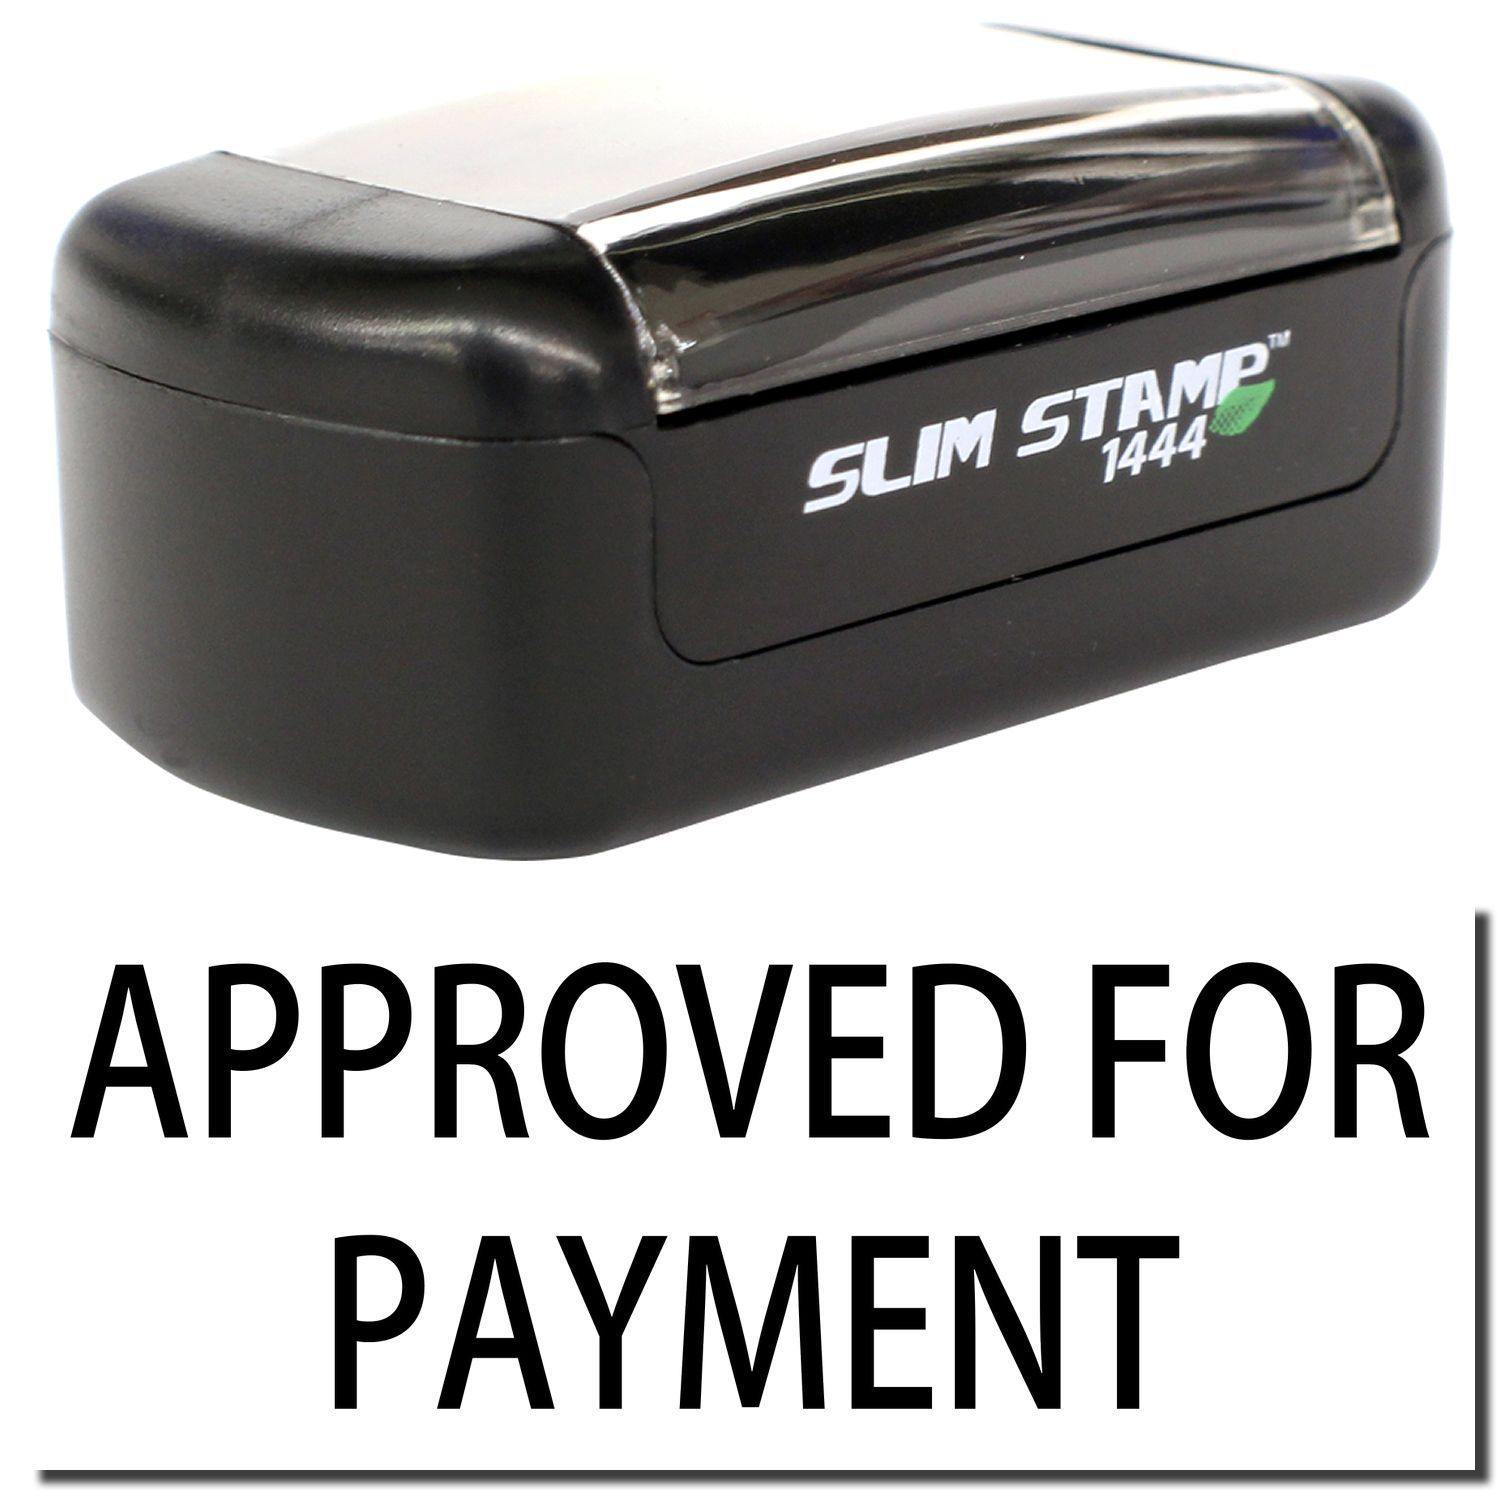 A stock office pre-inked stamp with a stamped image showing how the text "APPROVED FOR PAYMENT" is displayed after stamping.